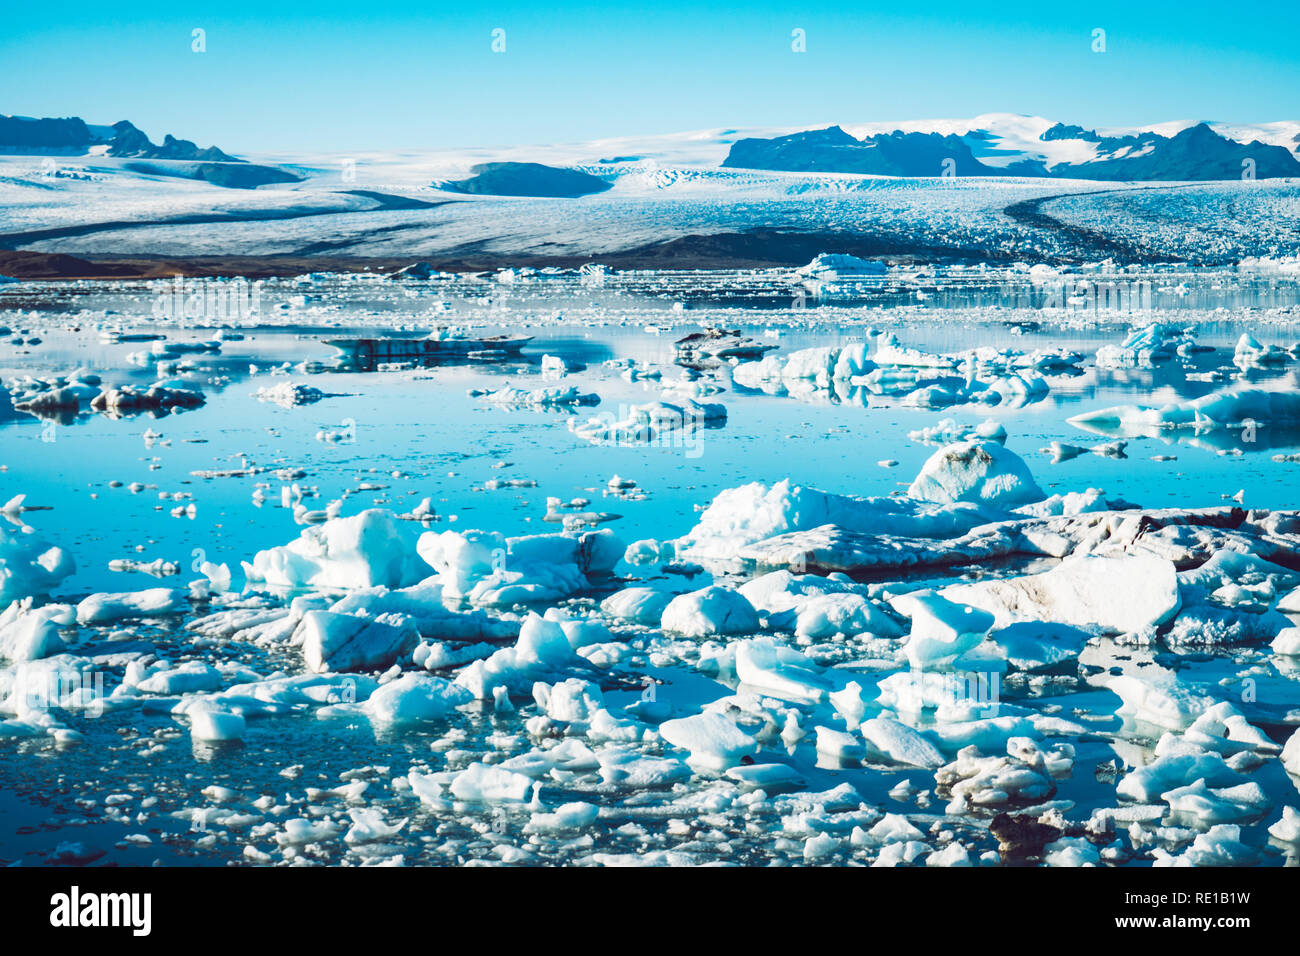 Spectacular glacial lagoon in Iceland with floating icebergs Stock Photo